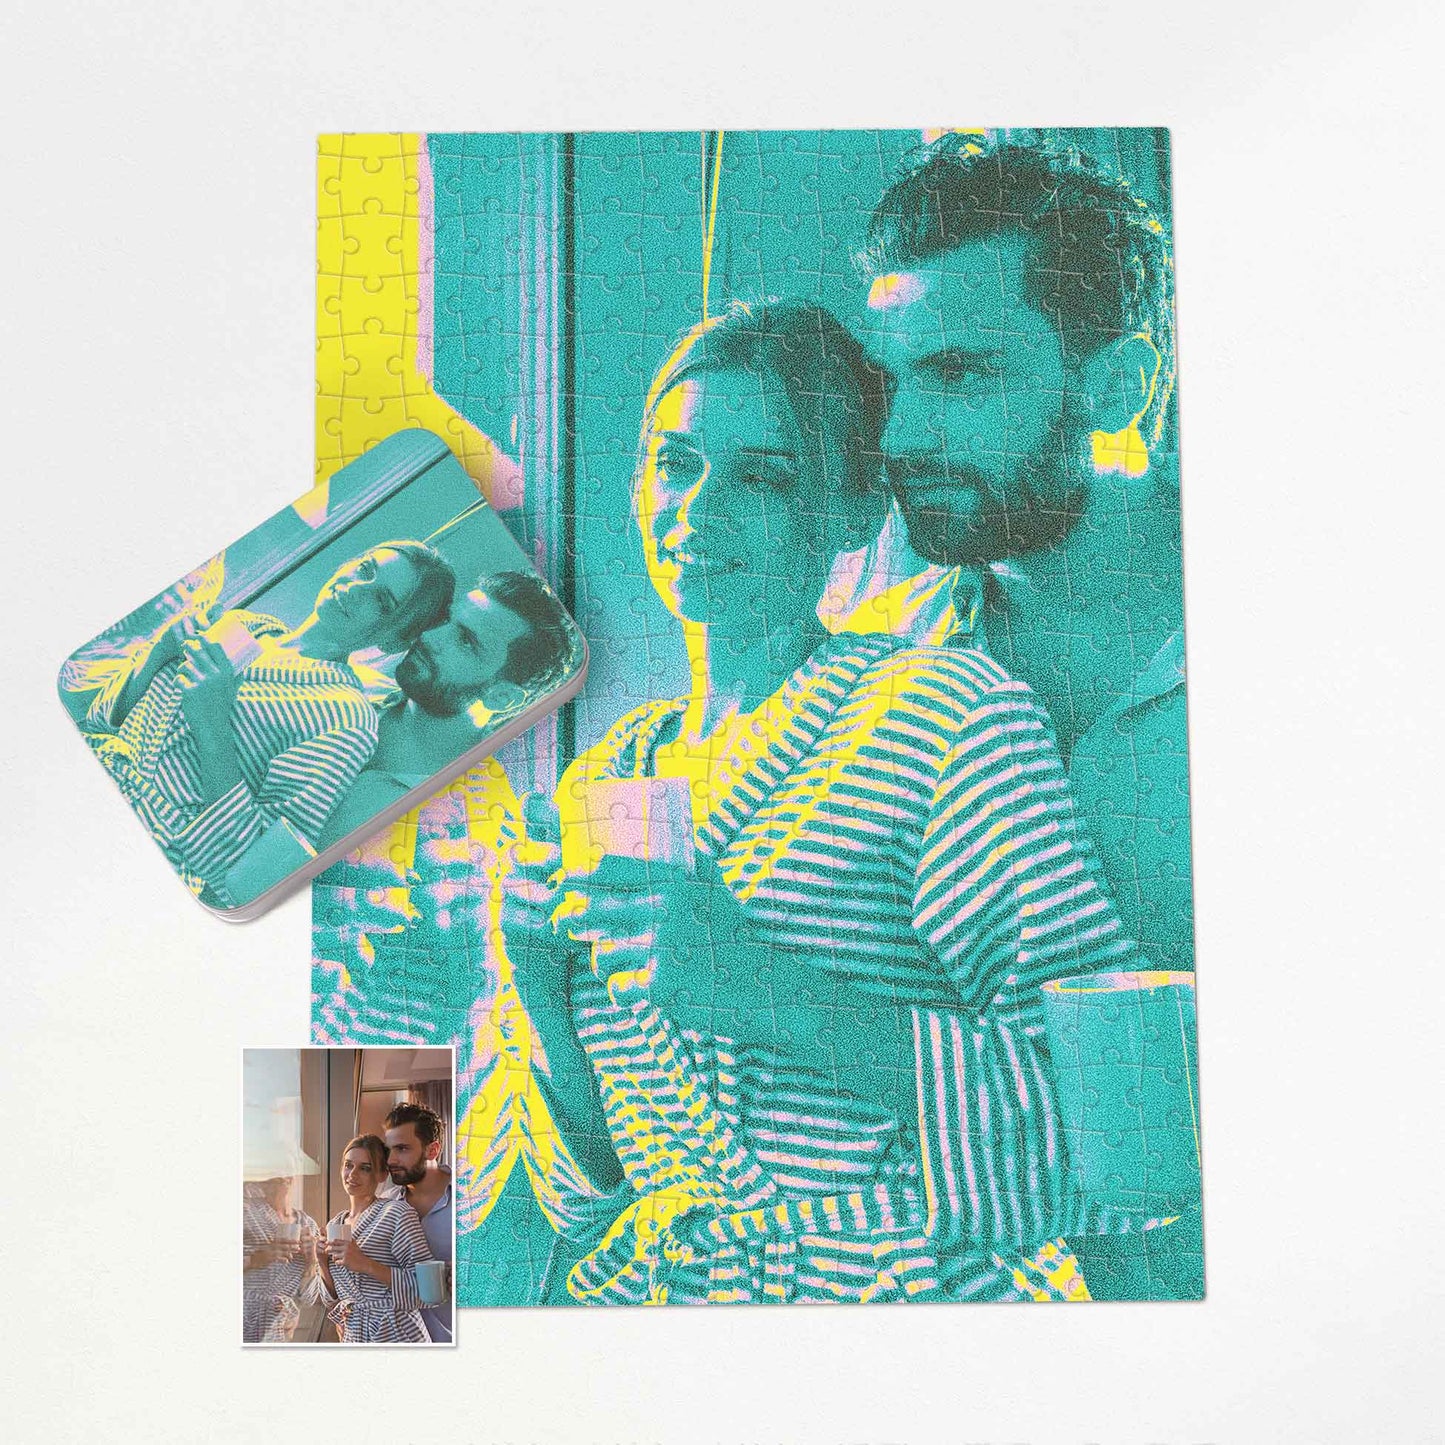 Customize your memories with a Personalised Acid Yellow Jigsaw Puzzle. Print from photo in abstract style, showcasing texture effect and acid vivid colors with refreshing teal hues. Handmade and modern, it's a beautiful and cool gift for family